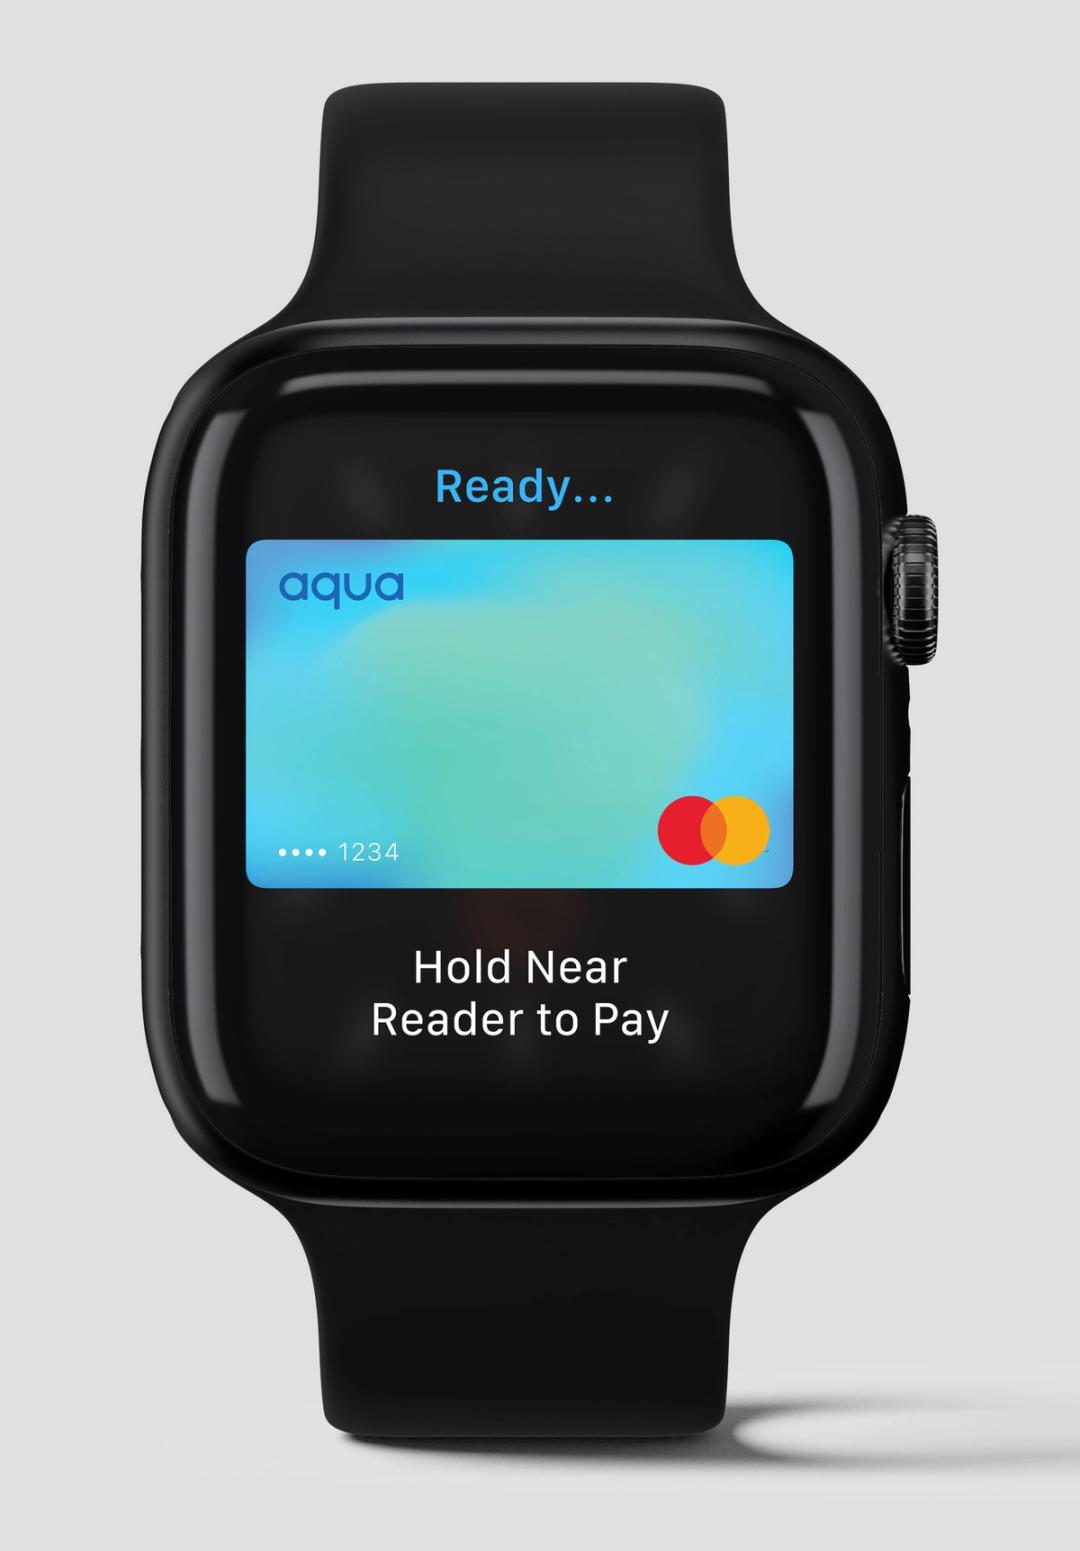 A black apple watch with the Aqua card on screen ready to pay 